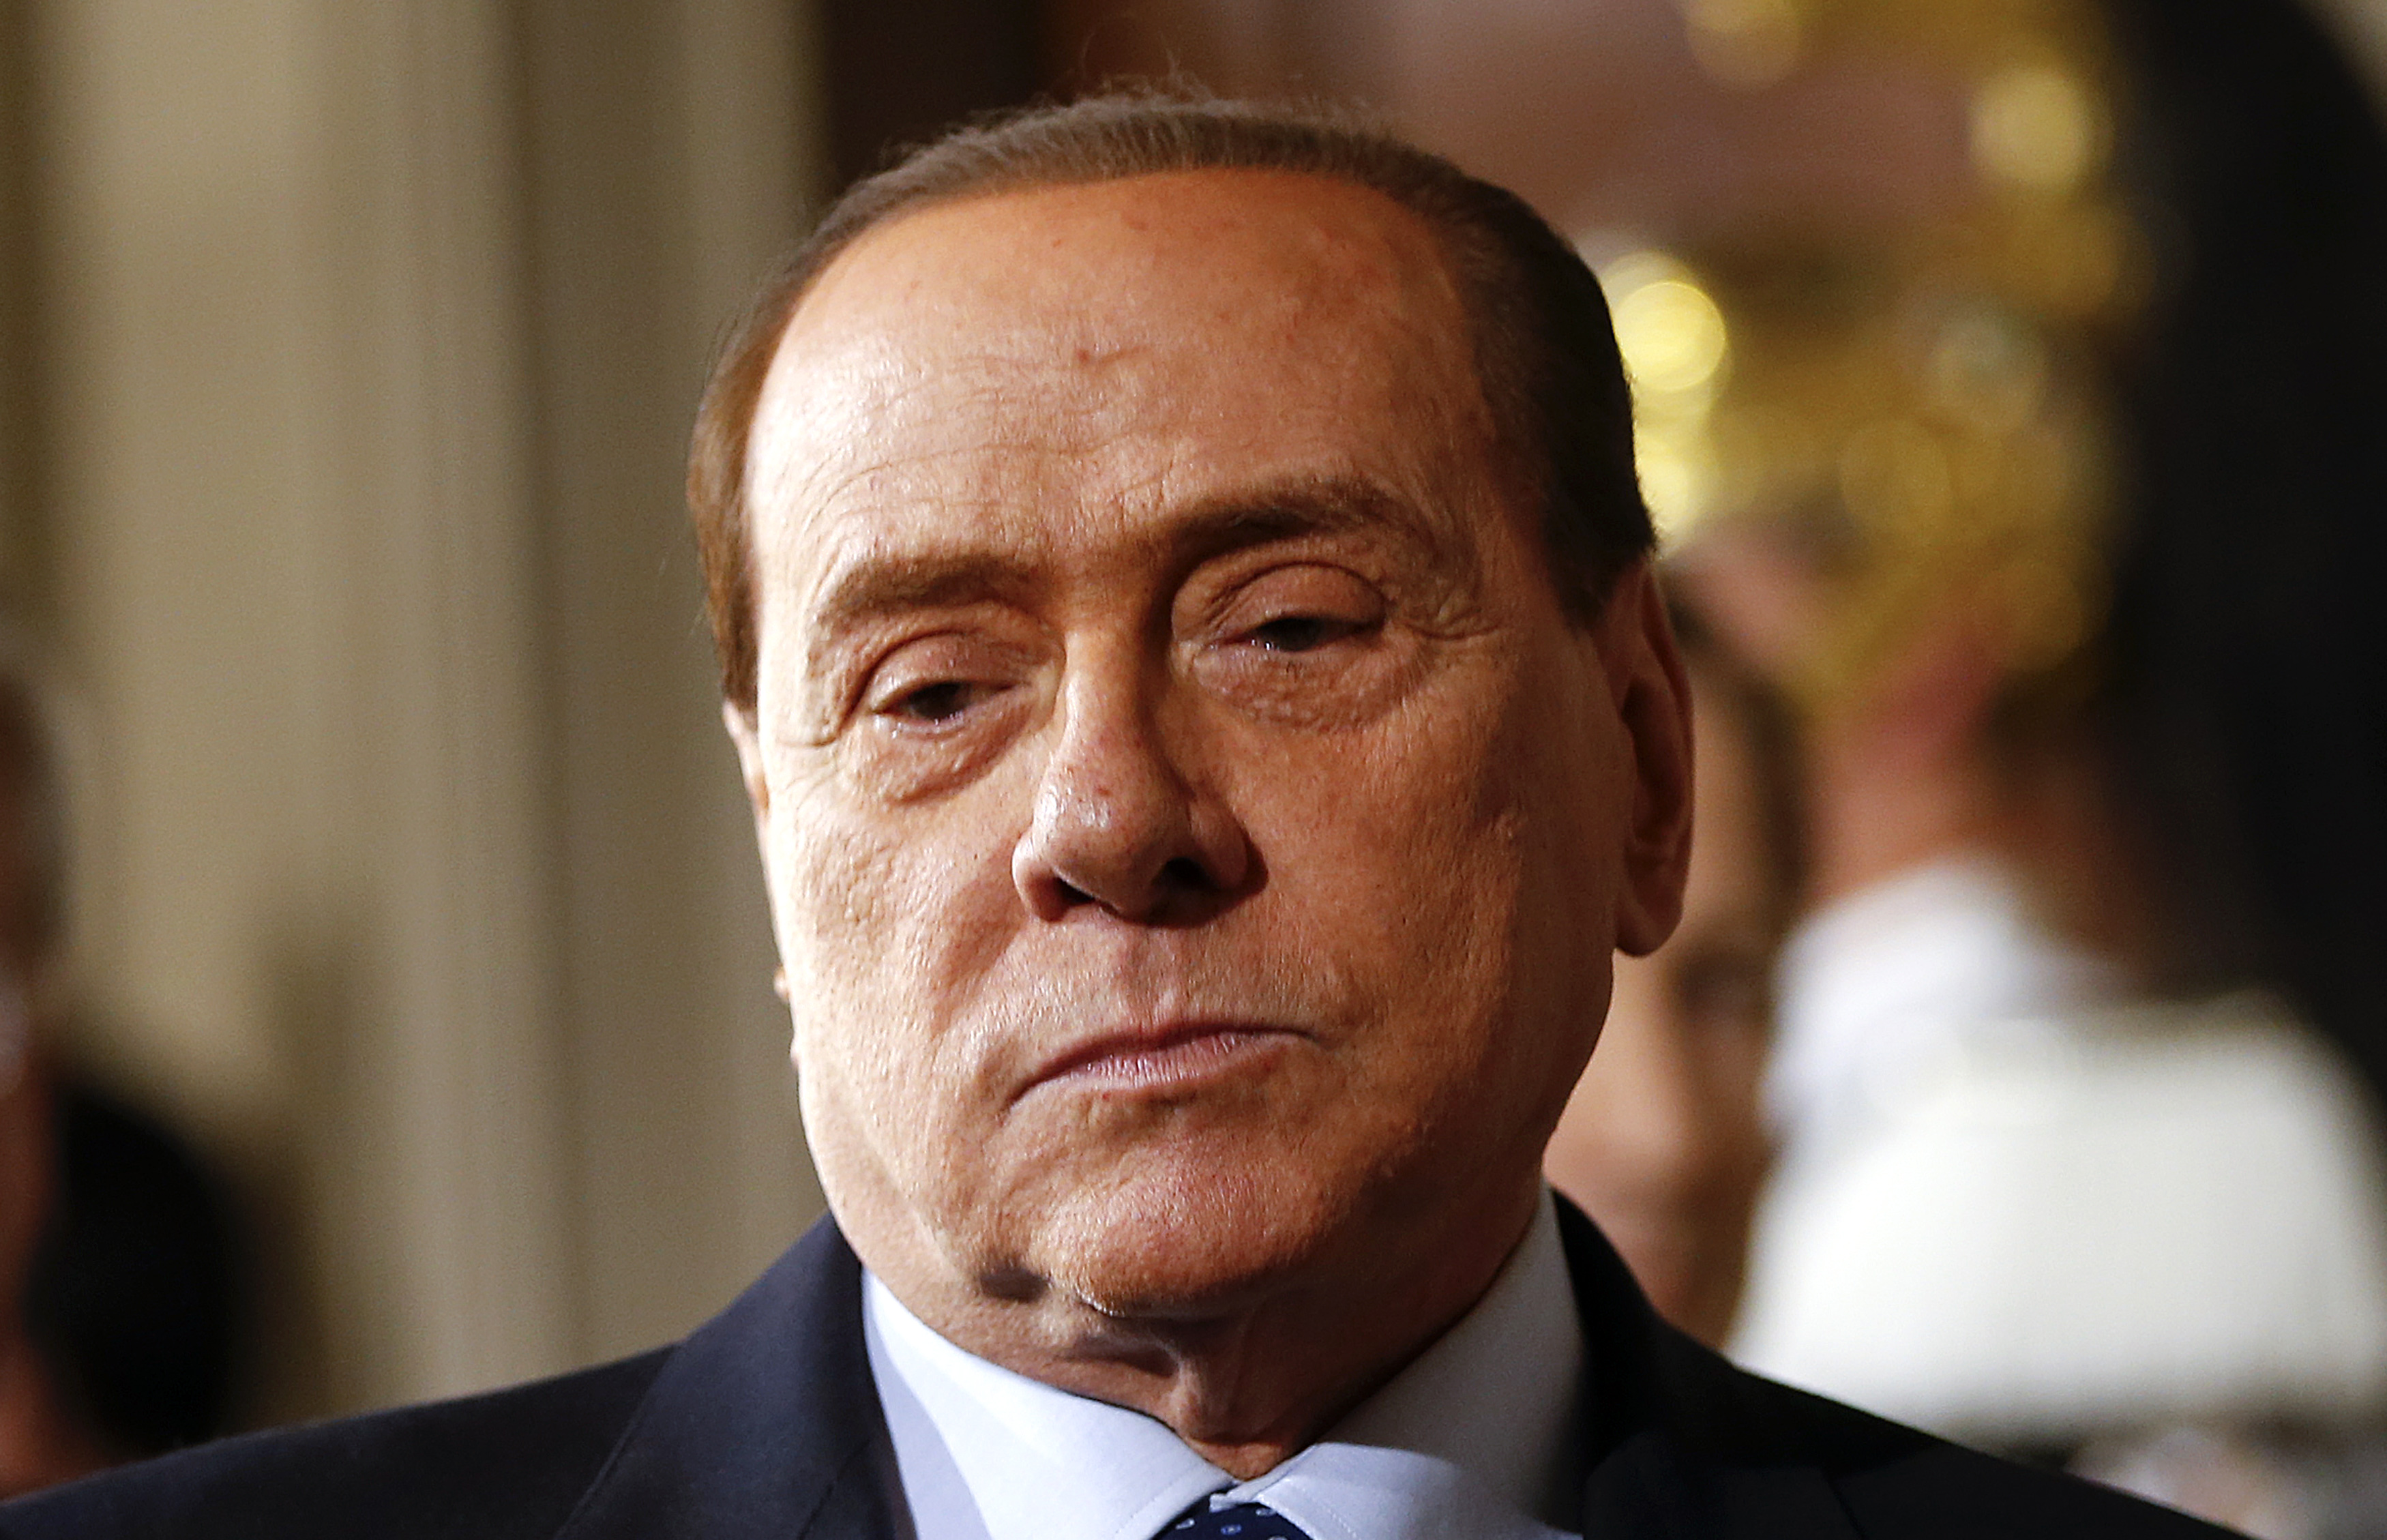 Leader of Forza Italia party Silvio Berlusconi at the end of the consultations with Italian President Giorgio Napolitano at the Quirinale Palace in Rome on Feb. 15, 2014.